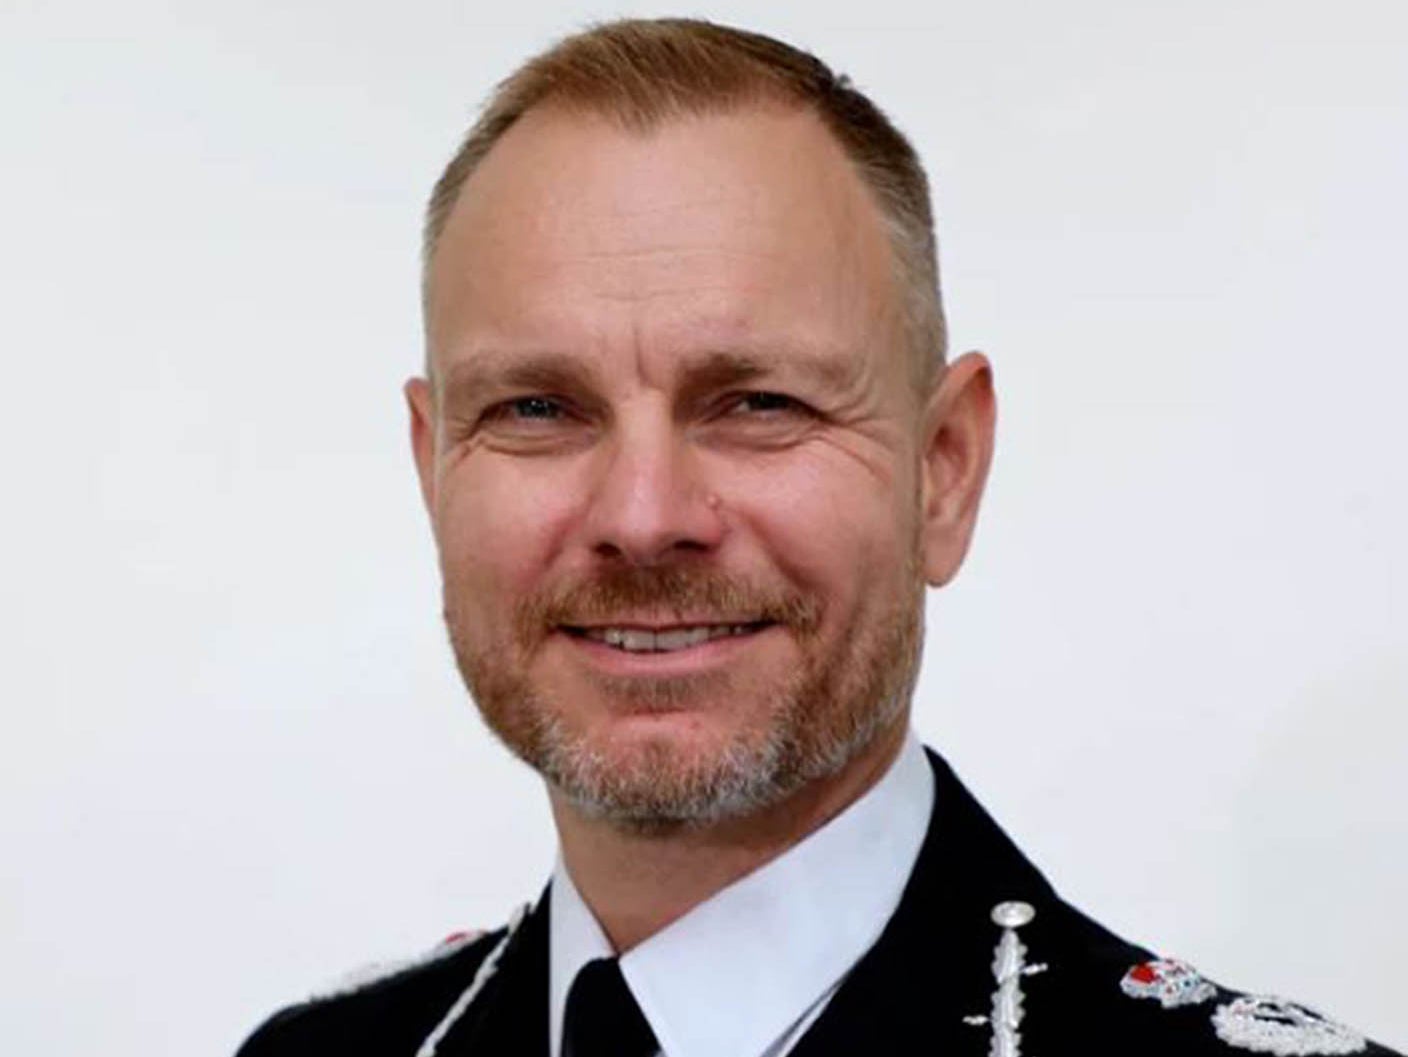 Head of Counter Terrorism Policing Matt Jukes has revealed that children now account for around one in eight terrorism-related arrests